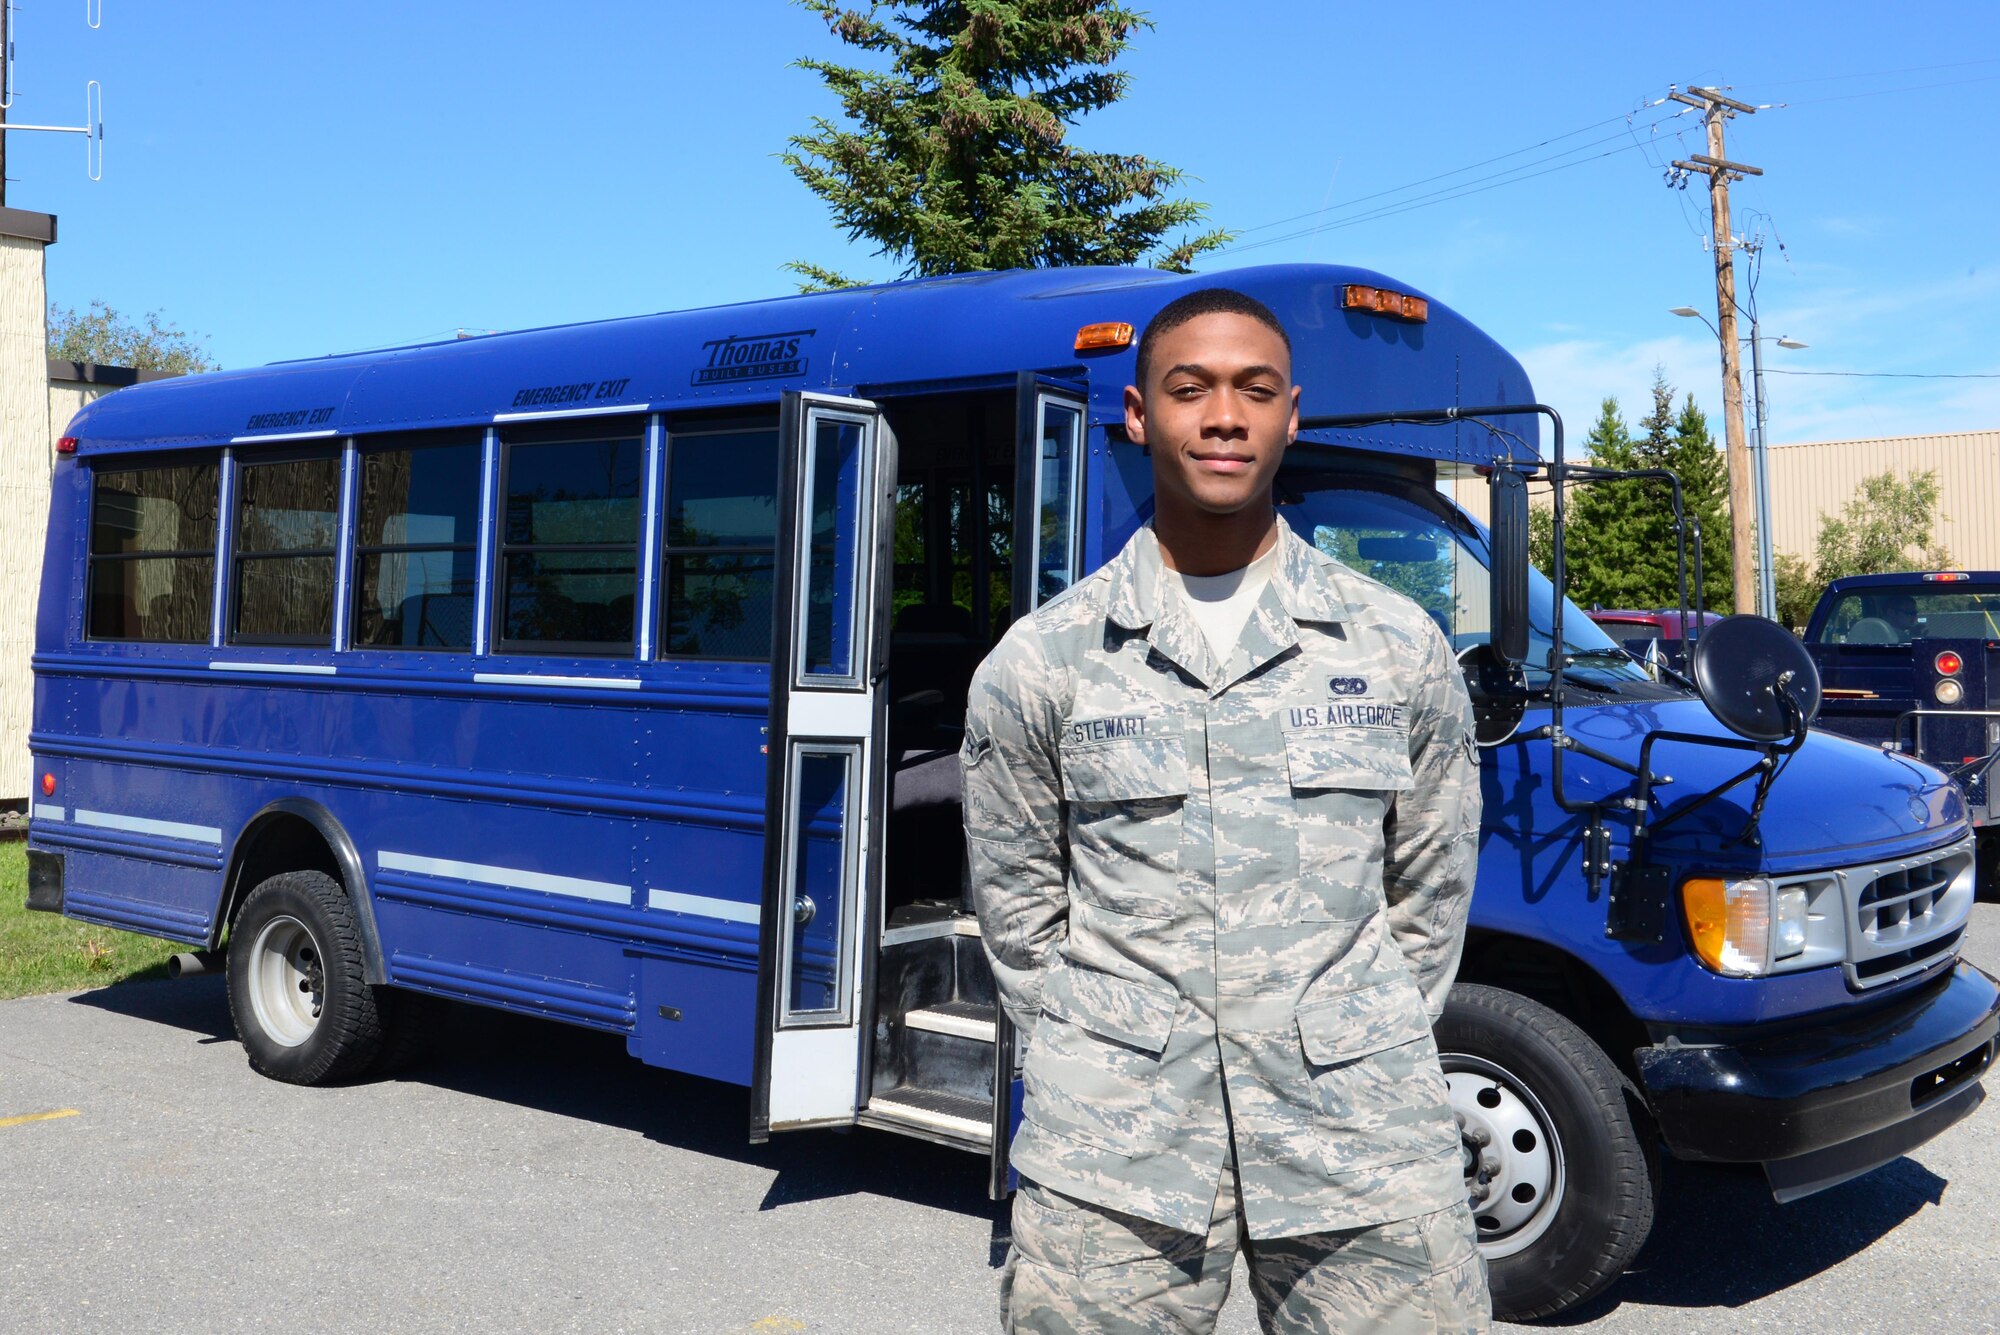 U.S. Air Force Airman Donovan Stewart, a 354th Logistics Readiness Squadron vehicle operator, takes a short break for a photo June 15, 2016, at Eielson Air Force Base, Alaska. Stewart was the driver for the visit of Japanese Air Self-Defense Force (JASDF) Warrant Officer Katsumi Yamazaki, the senior enlisted advisor of the JASDF. It was the first time a senior enlisted advisor was able to travel out to meet with his airmen during a RED FLAG-Alaska exercise. (U.S. Air Force photo by Airman 1st Class Cassandra Whitman/Released)